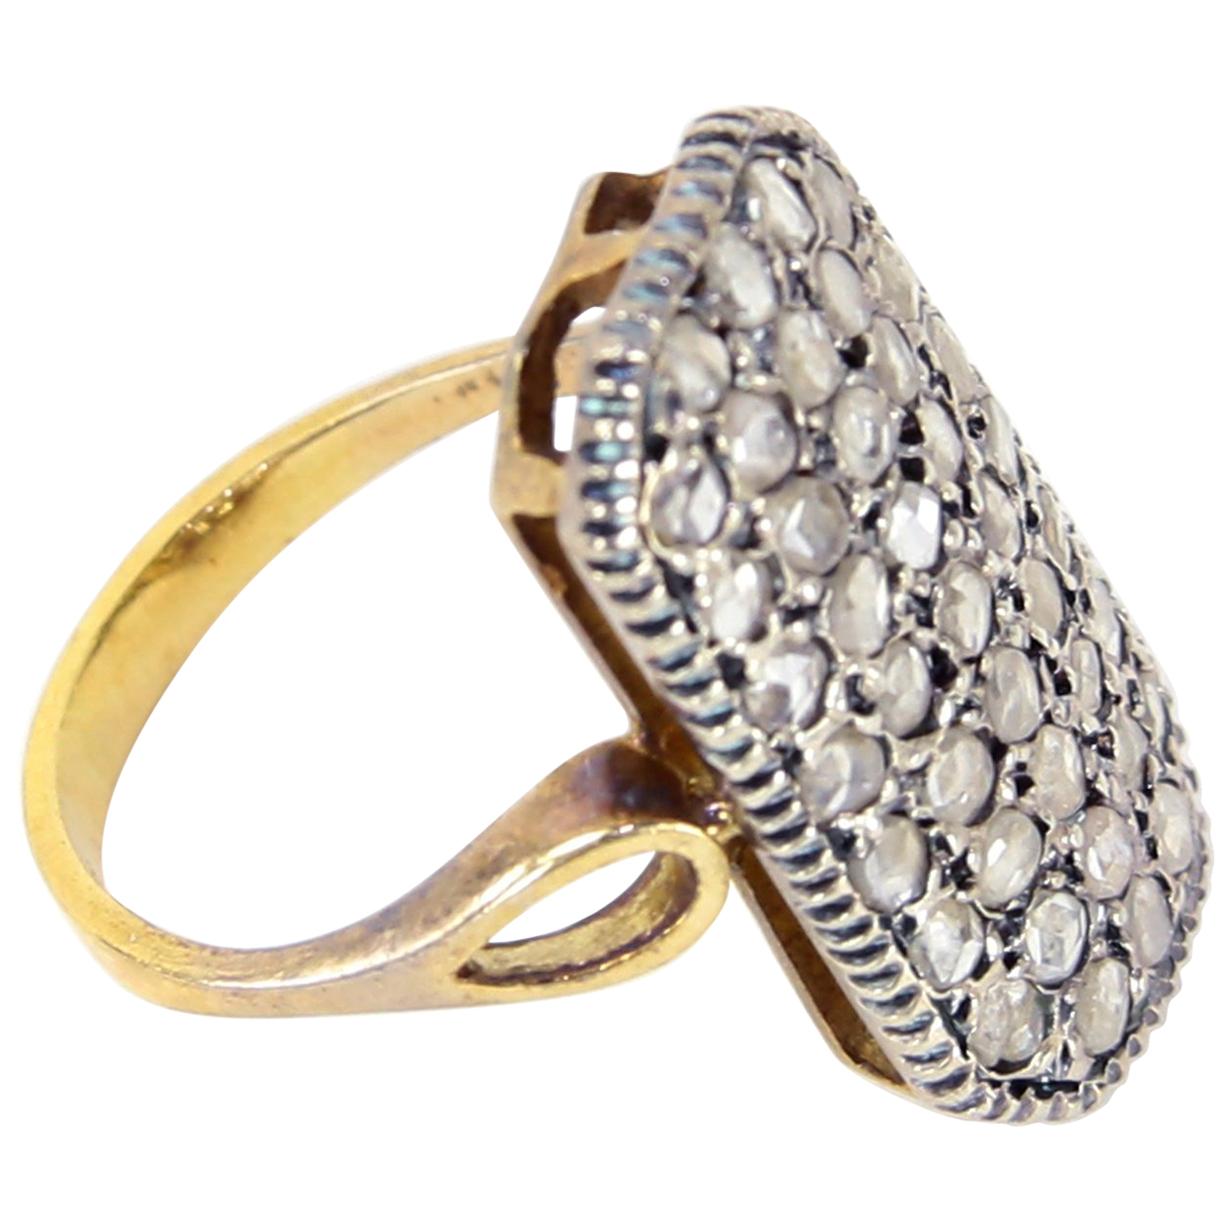 Antique Diamond Silver Gold Heirloom Ring